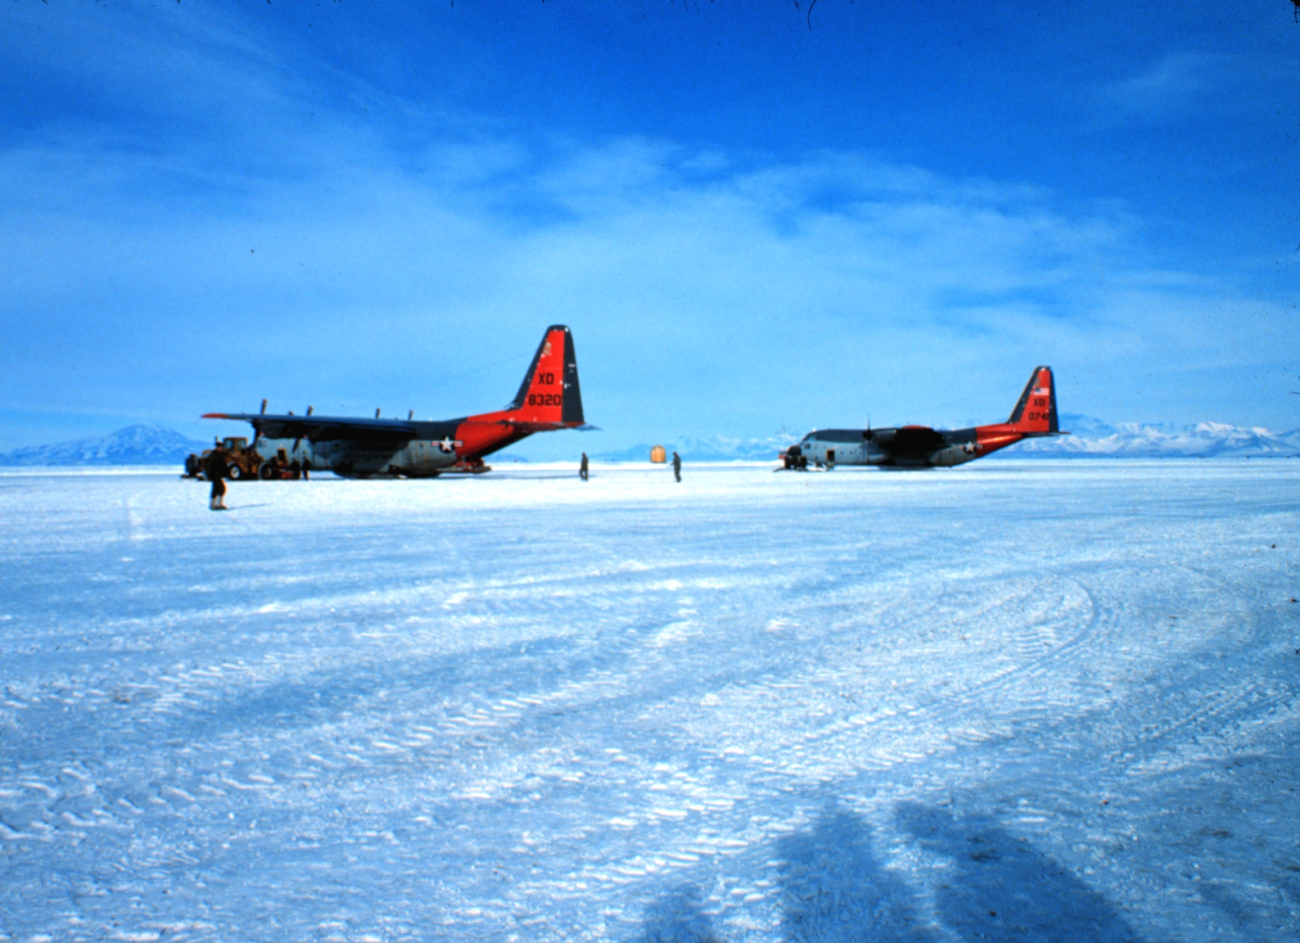 Ski-equipped C-130's ready for a trip to the South Pole